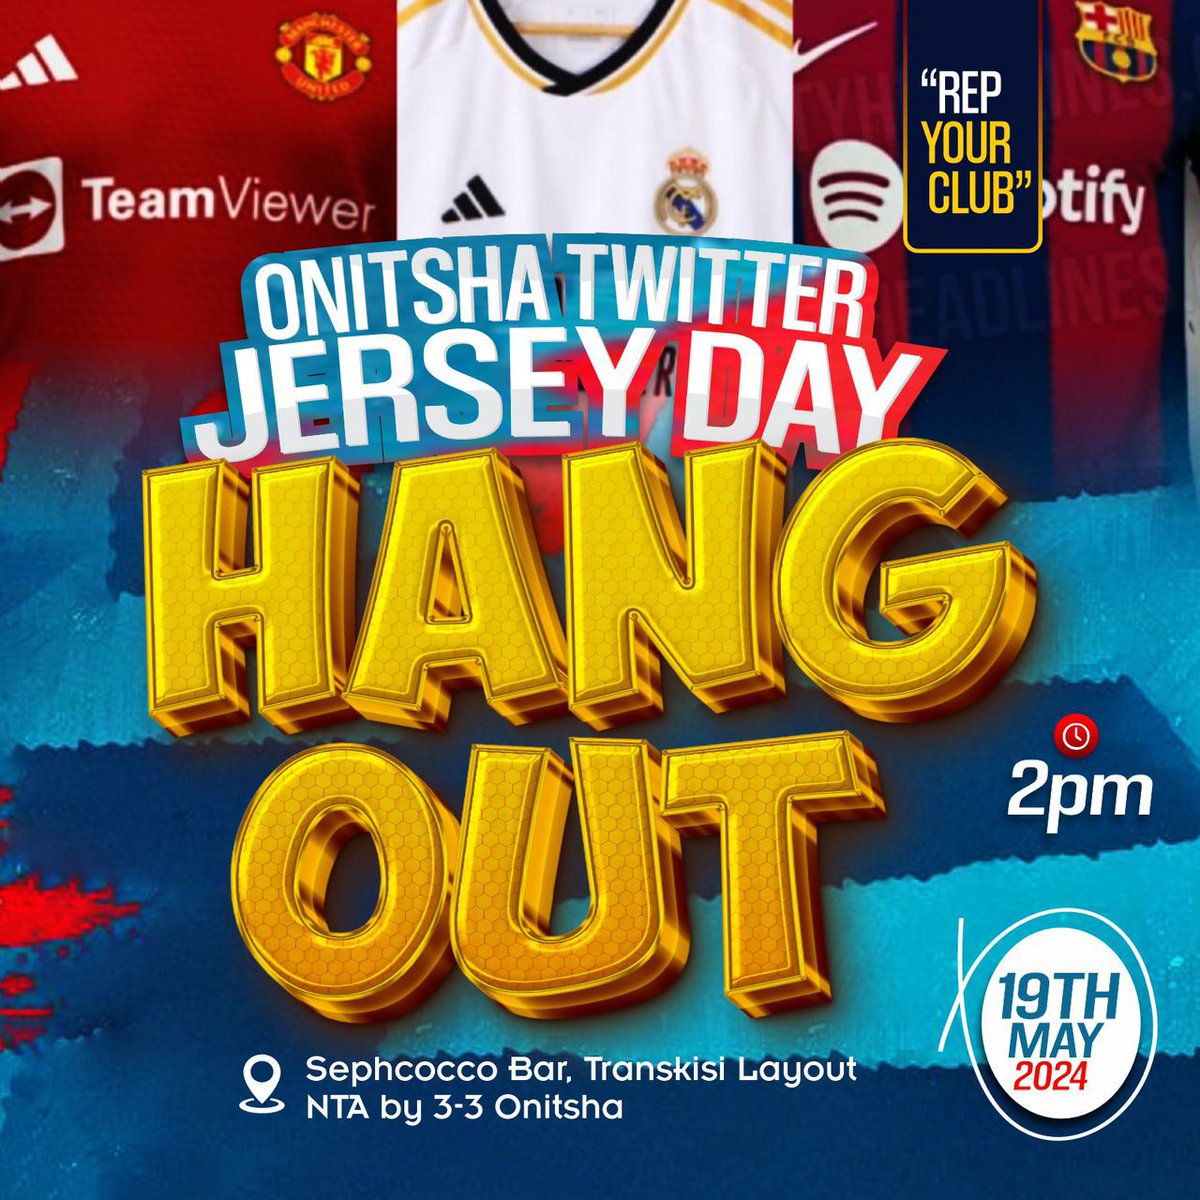 Ejechaa mba, Home is Home Someone should help me tell some folks that WaterBoy is on town #OnitshaTwitterJerseyHangout #RepYourClub Ready to meet some happy people that day